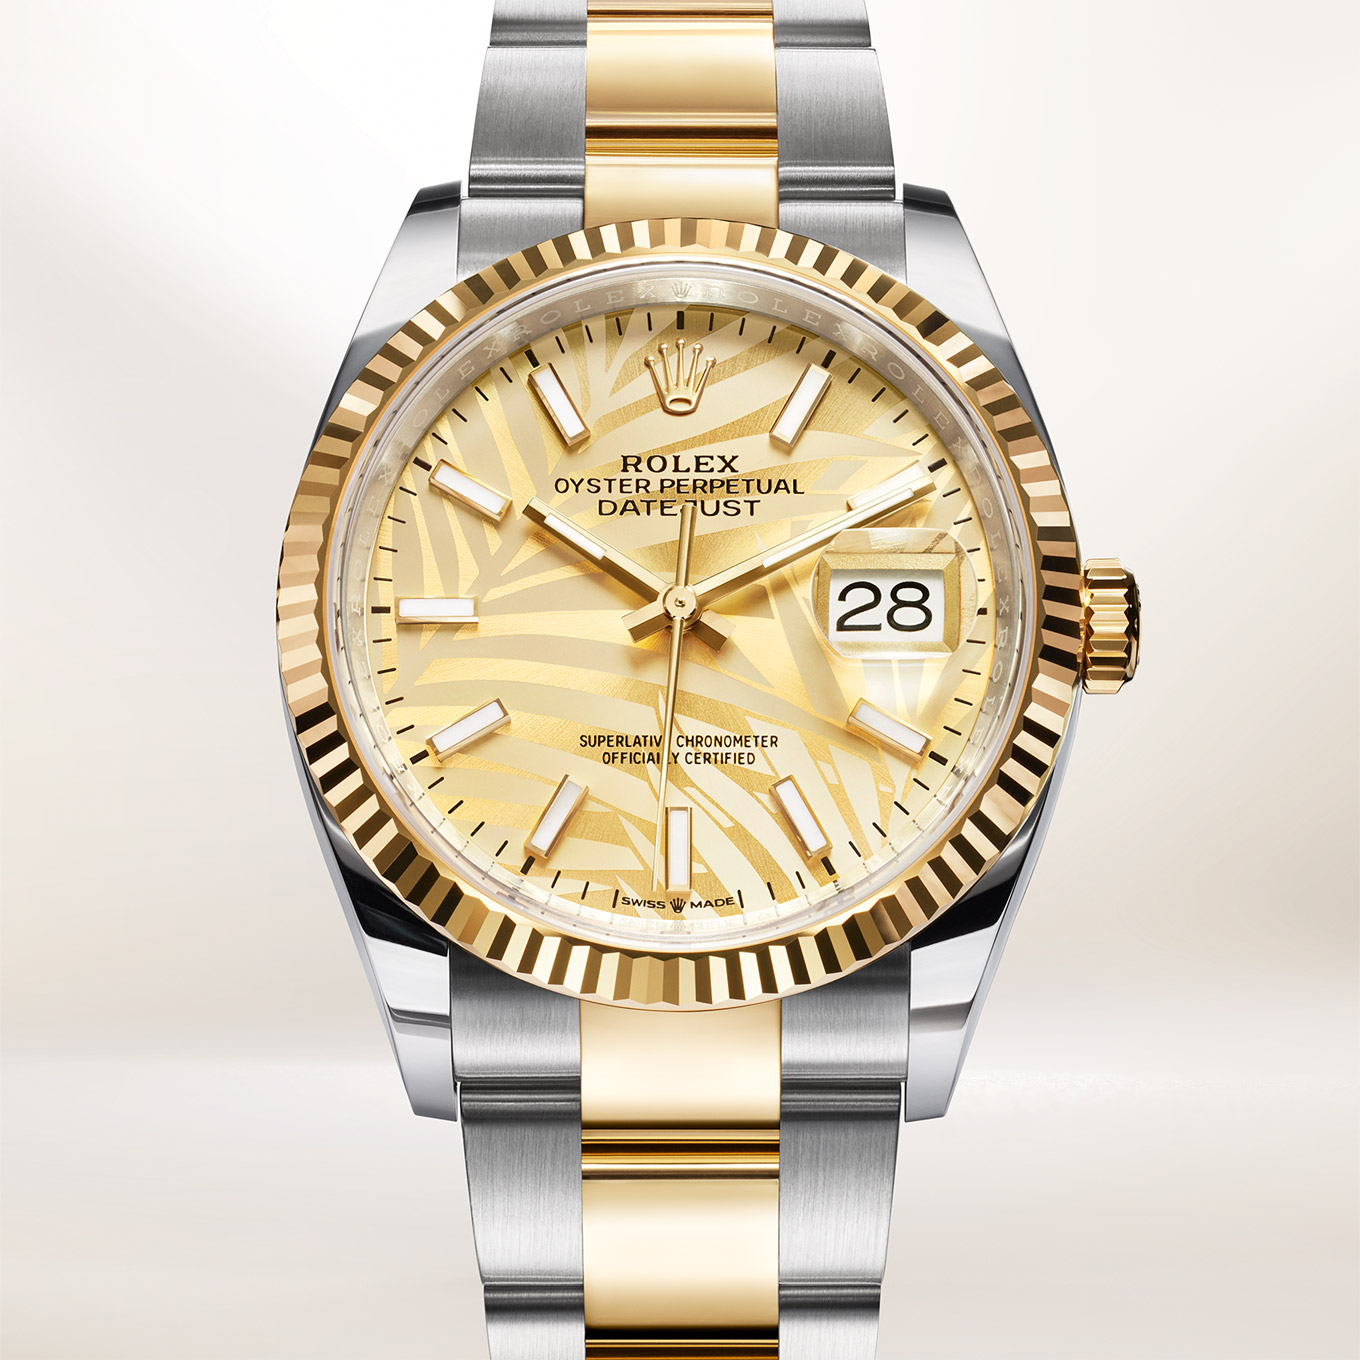 Rolex Oyster Perpetual 14203 Roman numeral